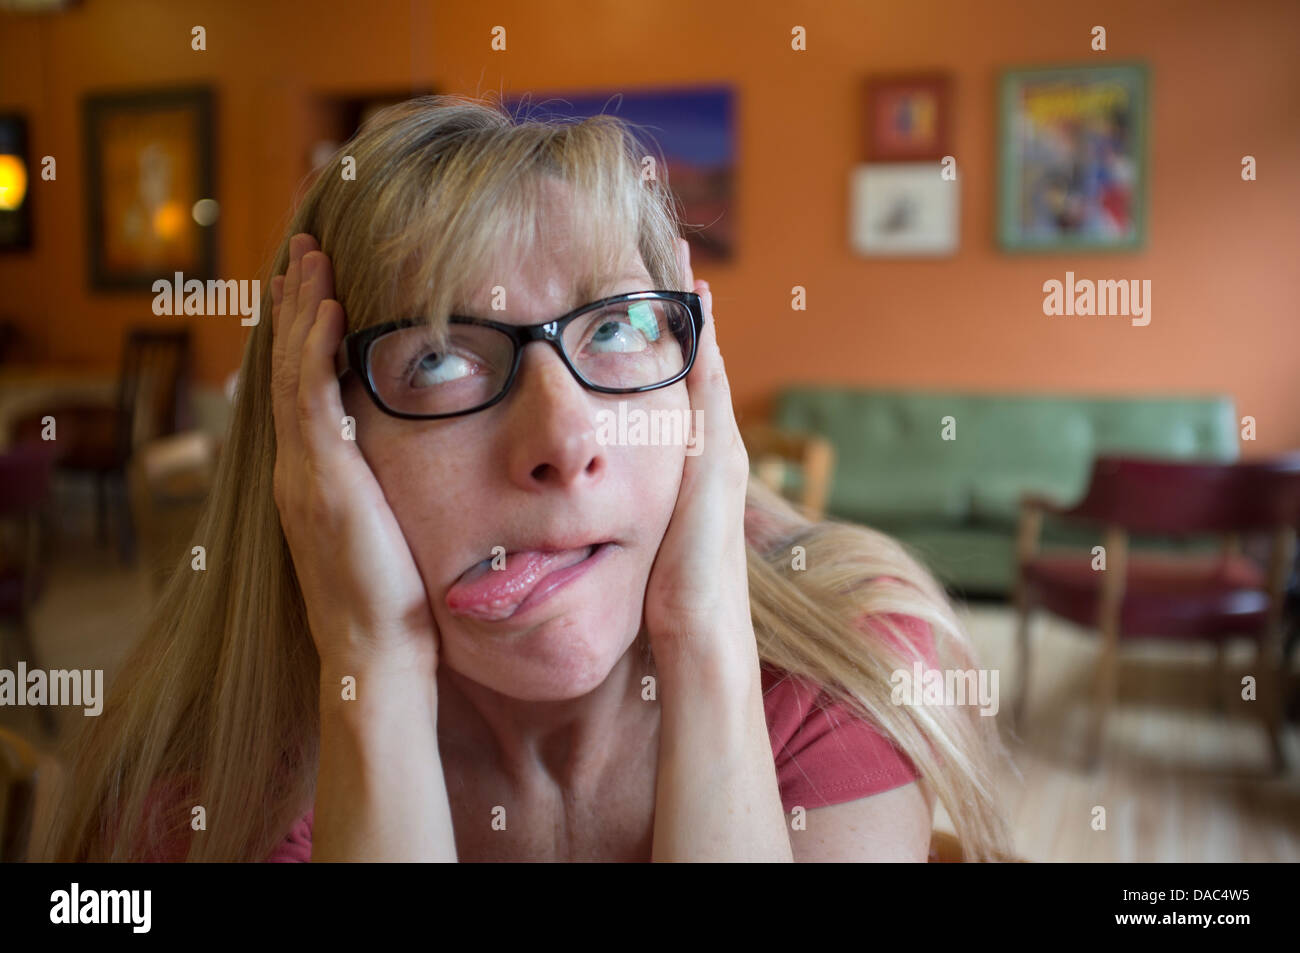 Female wearing glasses pulling cheeks, looking upward and sticking tongue out. Stock Photo